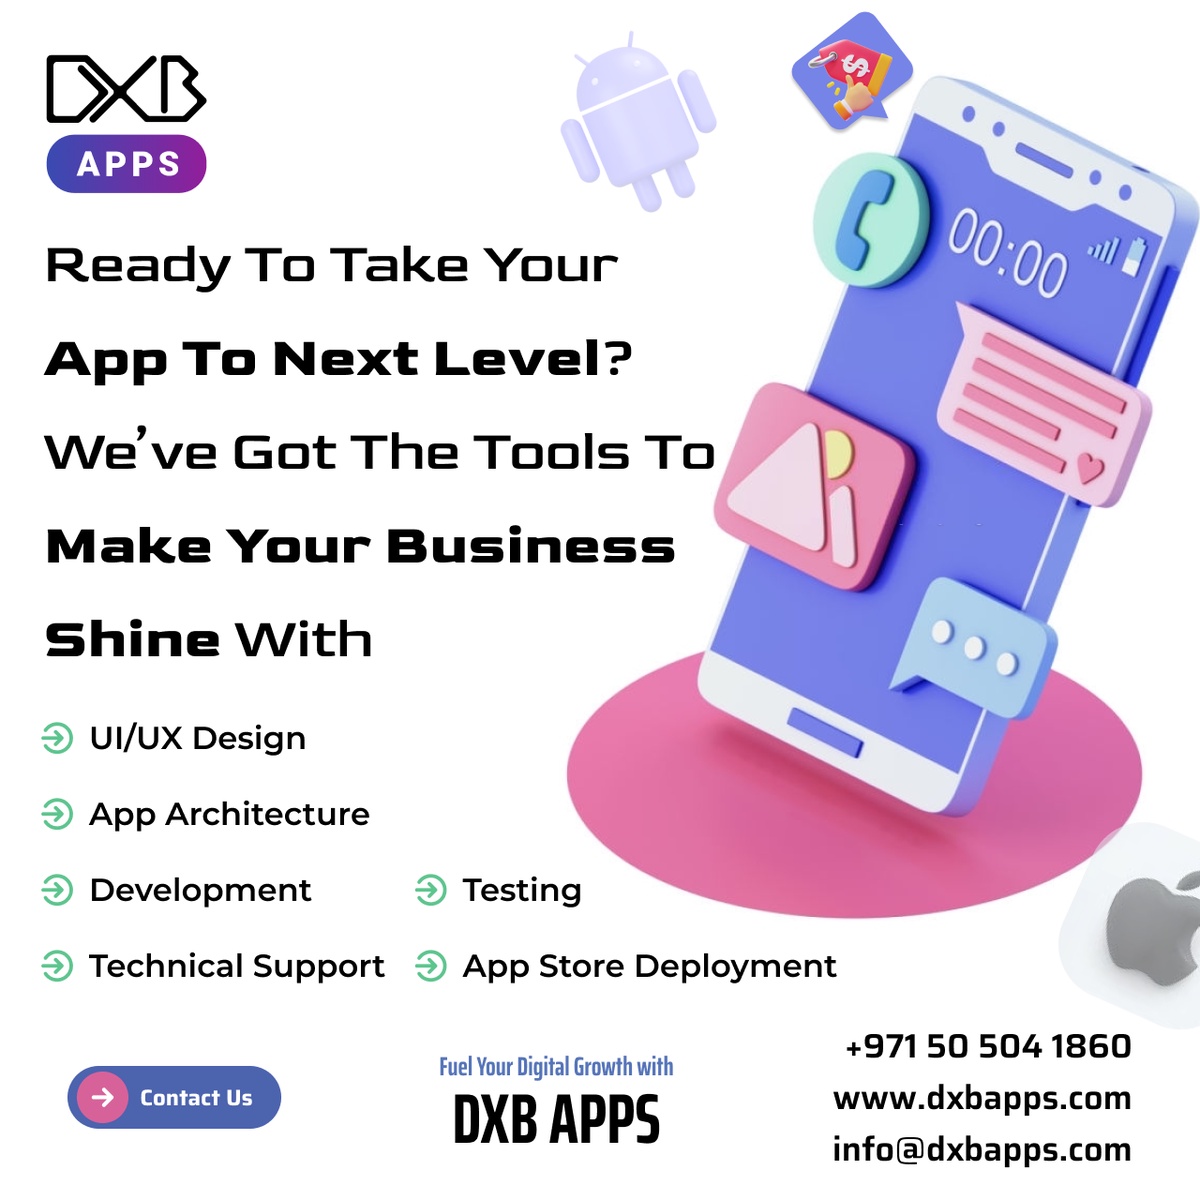 DXB APPS, Indeed A Leading Mobile App Development Company Abu Dhabi